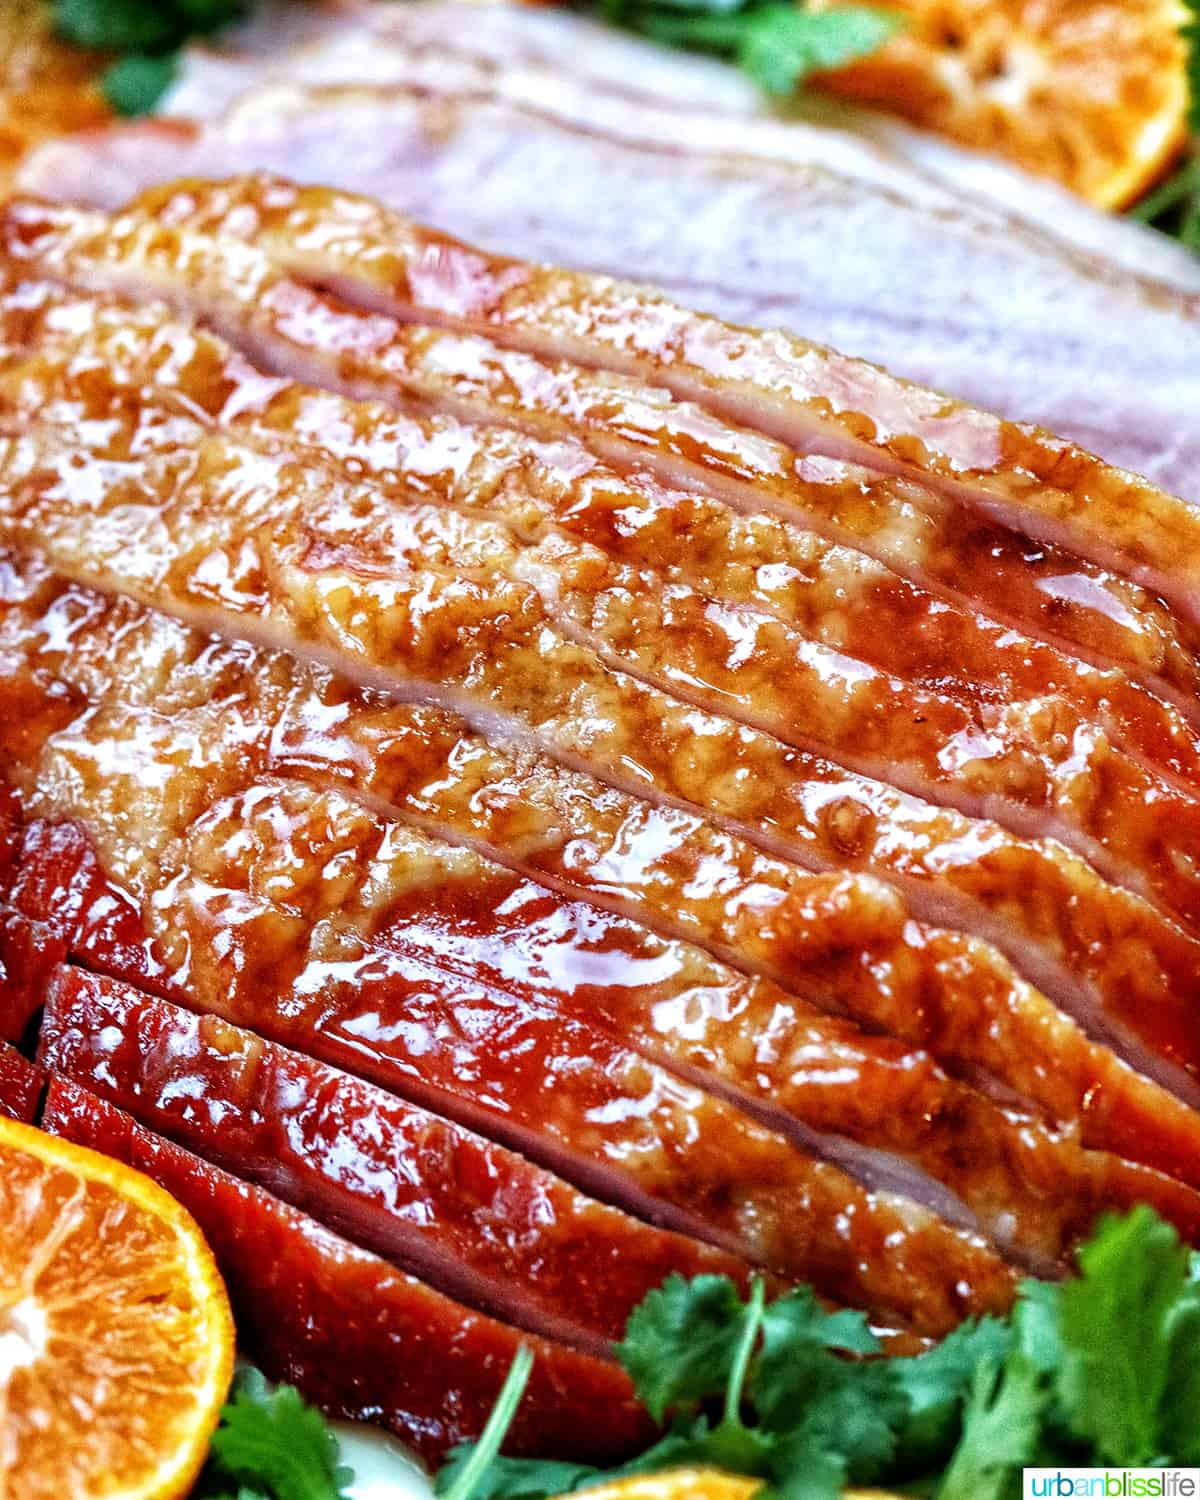 sliced honey glazed air fryer ham on a plate with fresh herbs and sliced oranges.